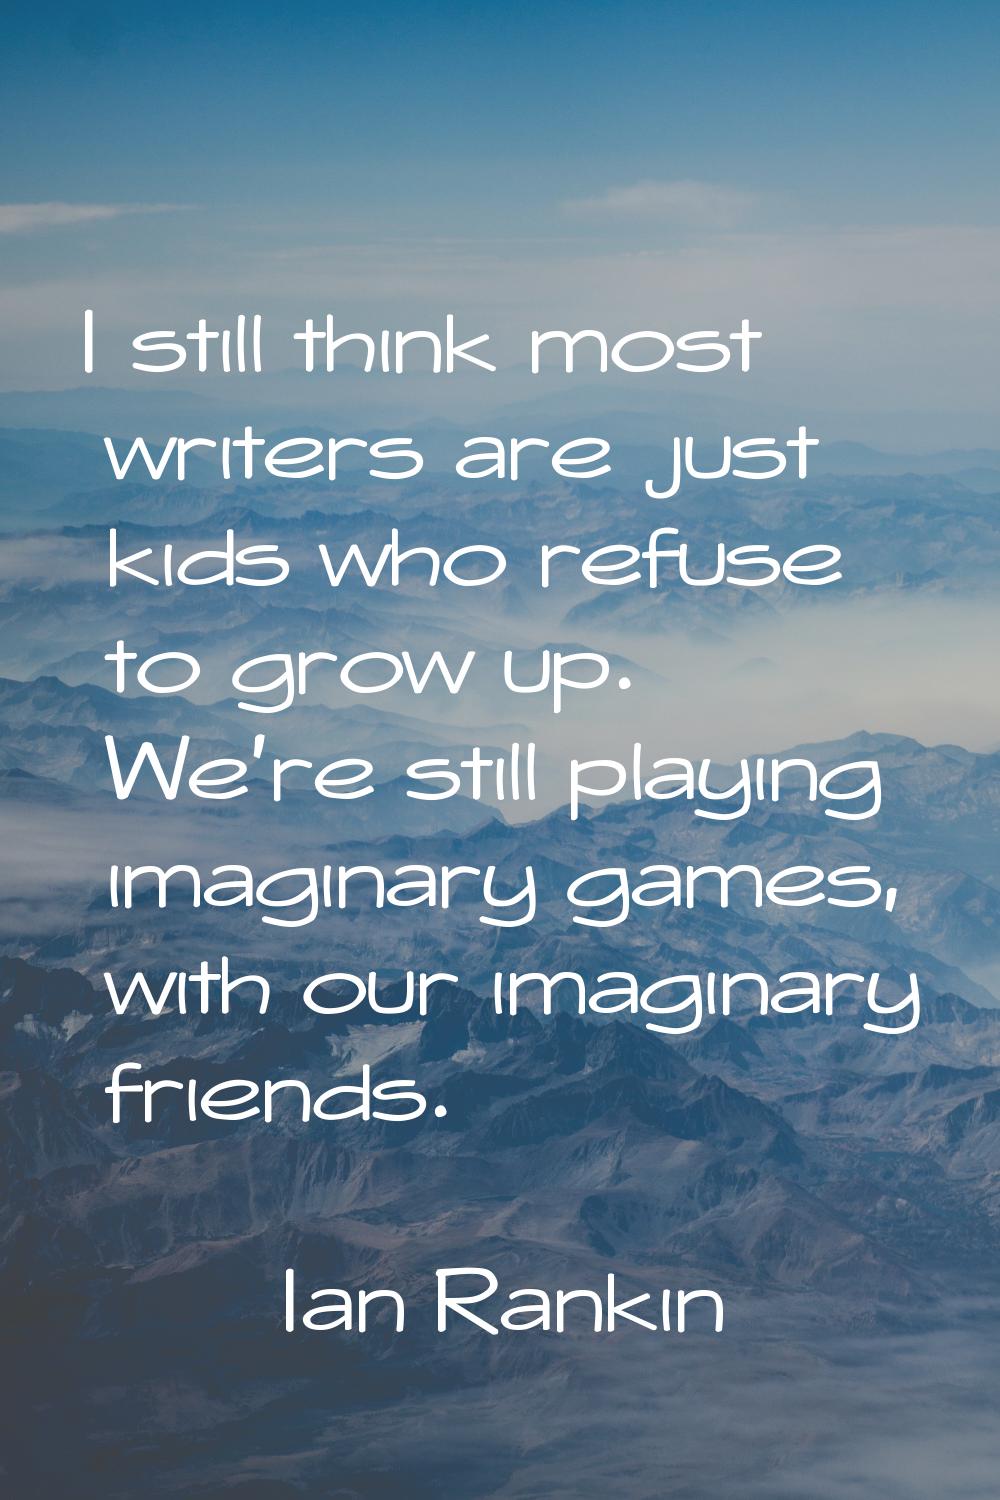 I still think most writers are just kids who refuse to grow up. We're still playing imaginary games